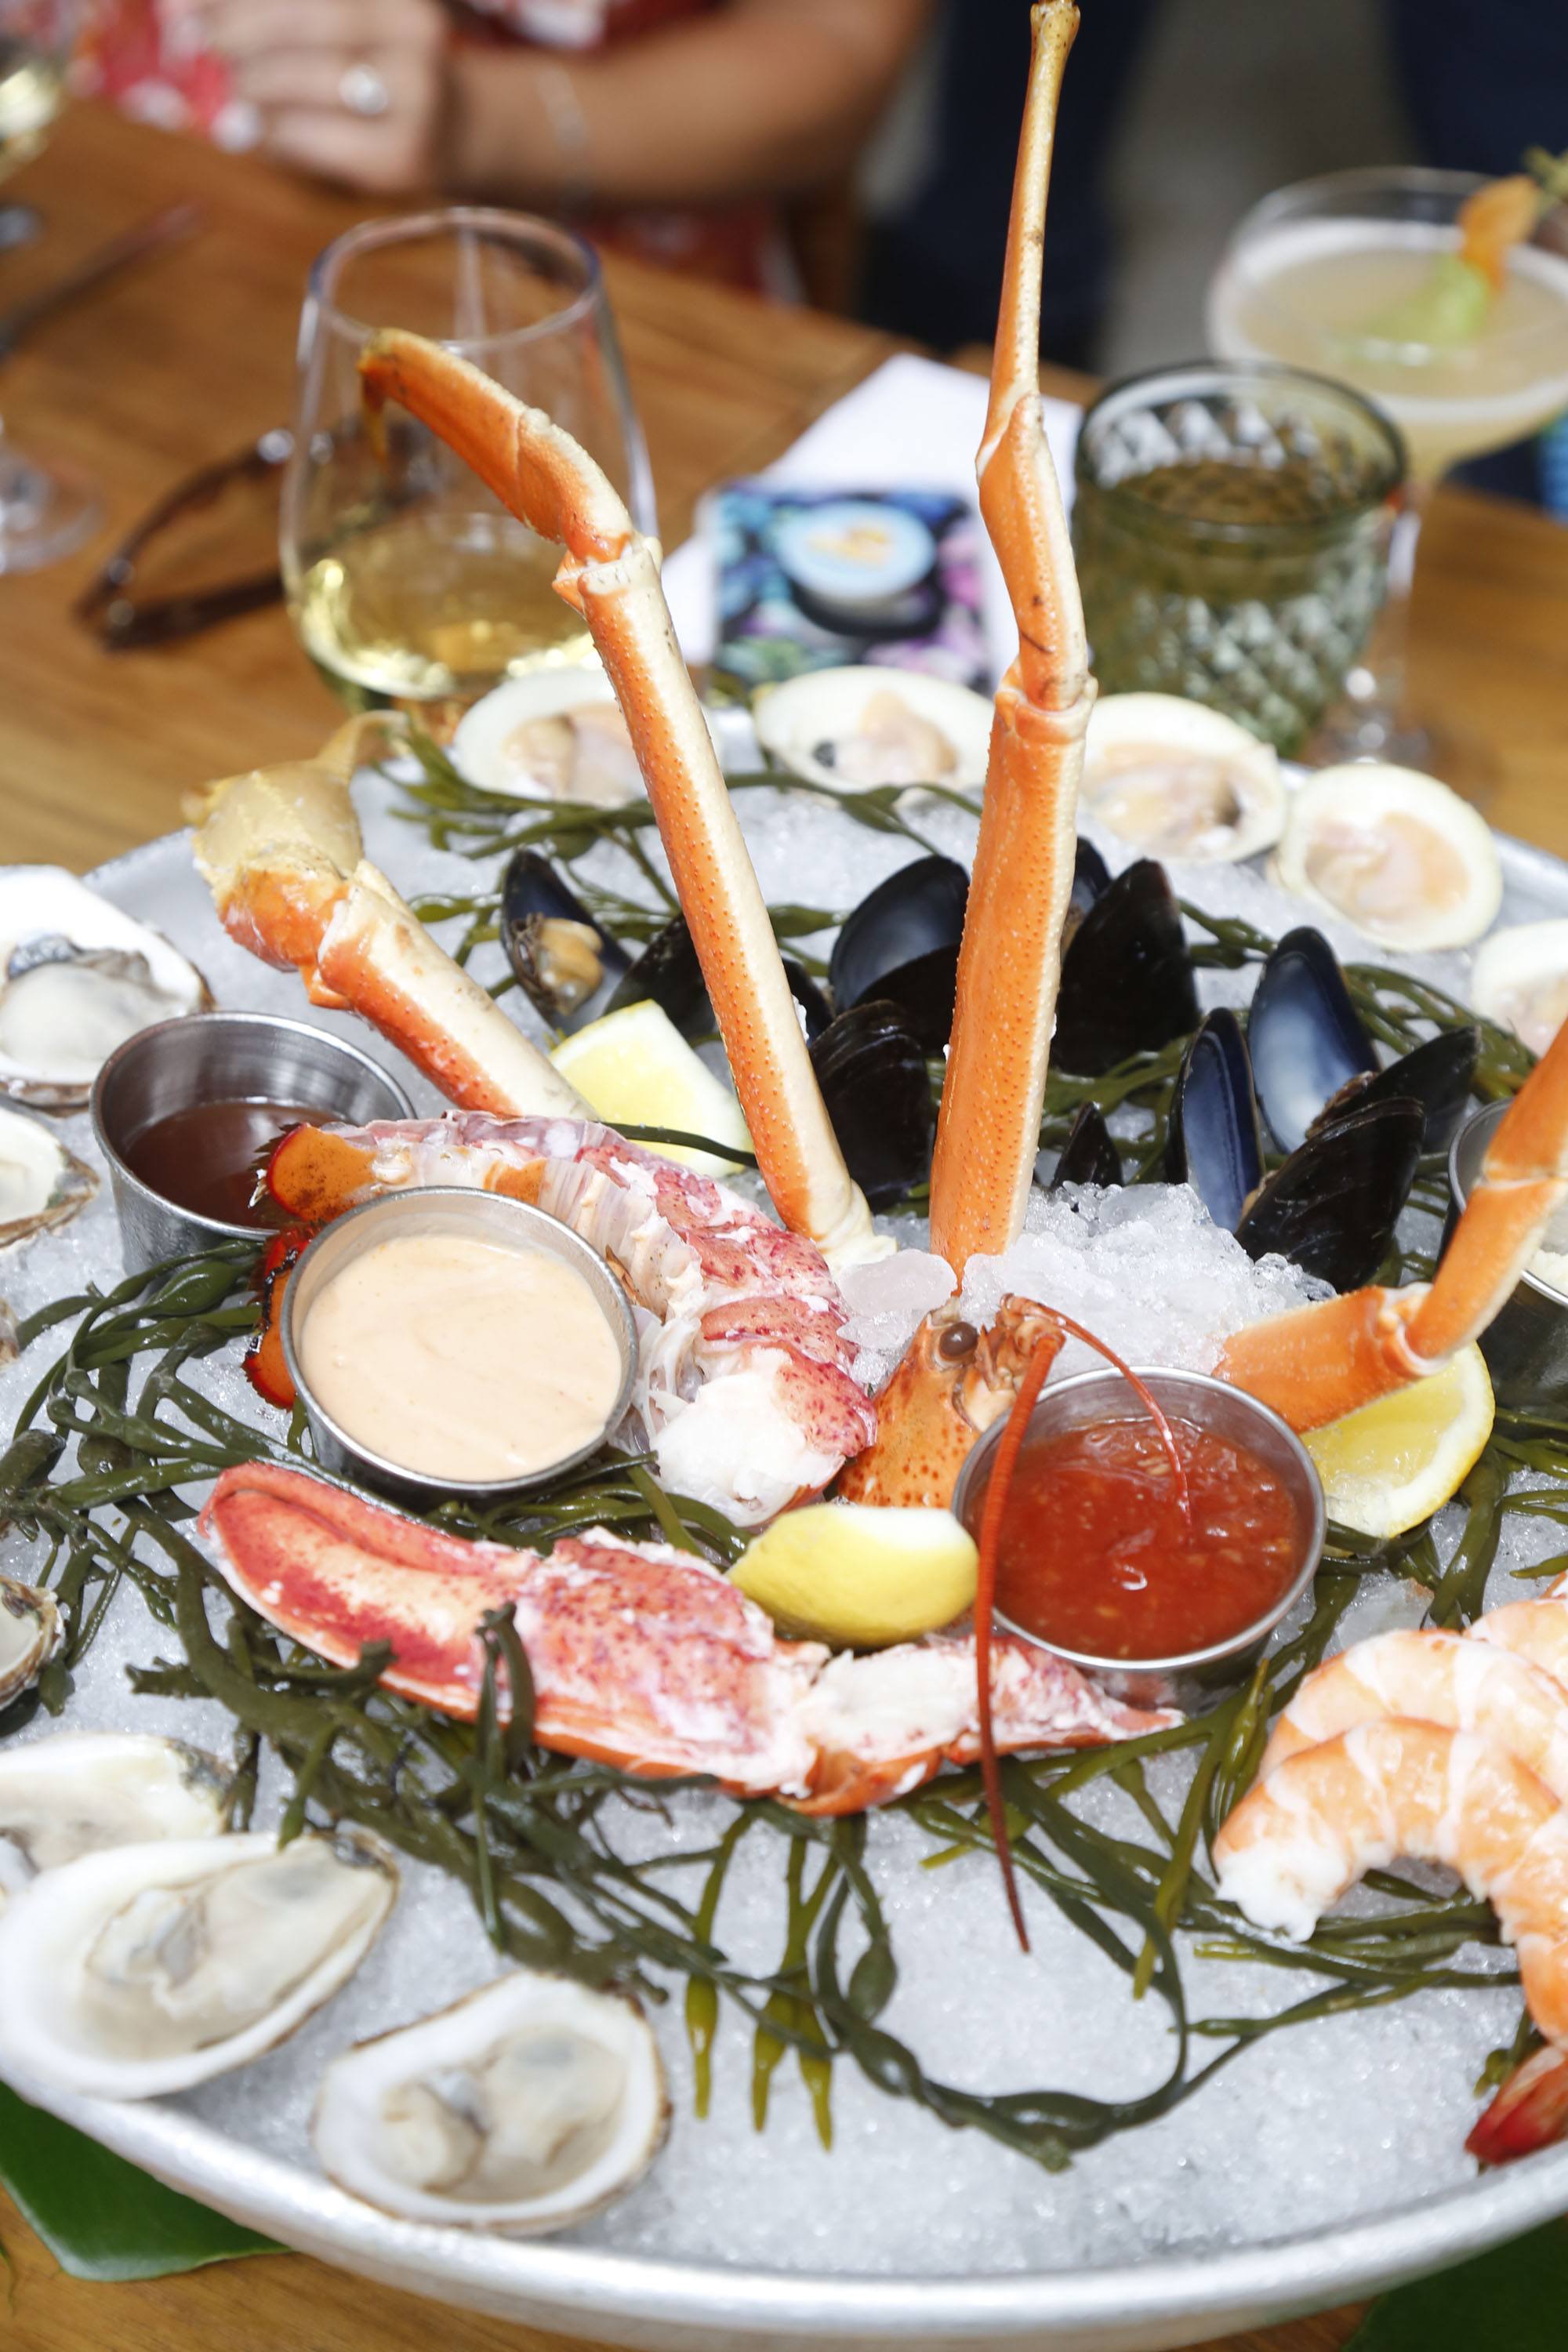 Le Zoo’s seafood tower